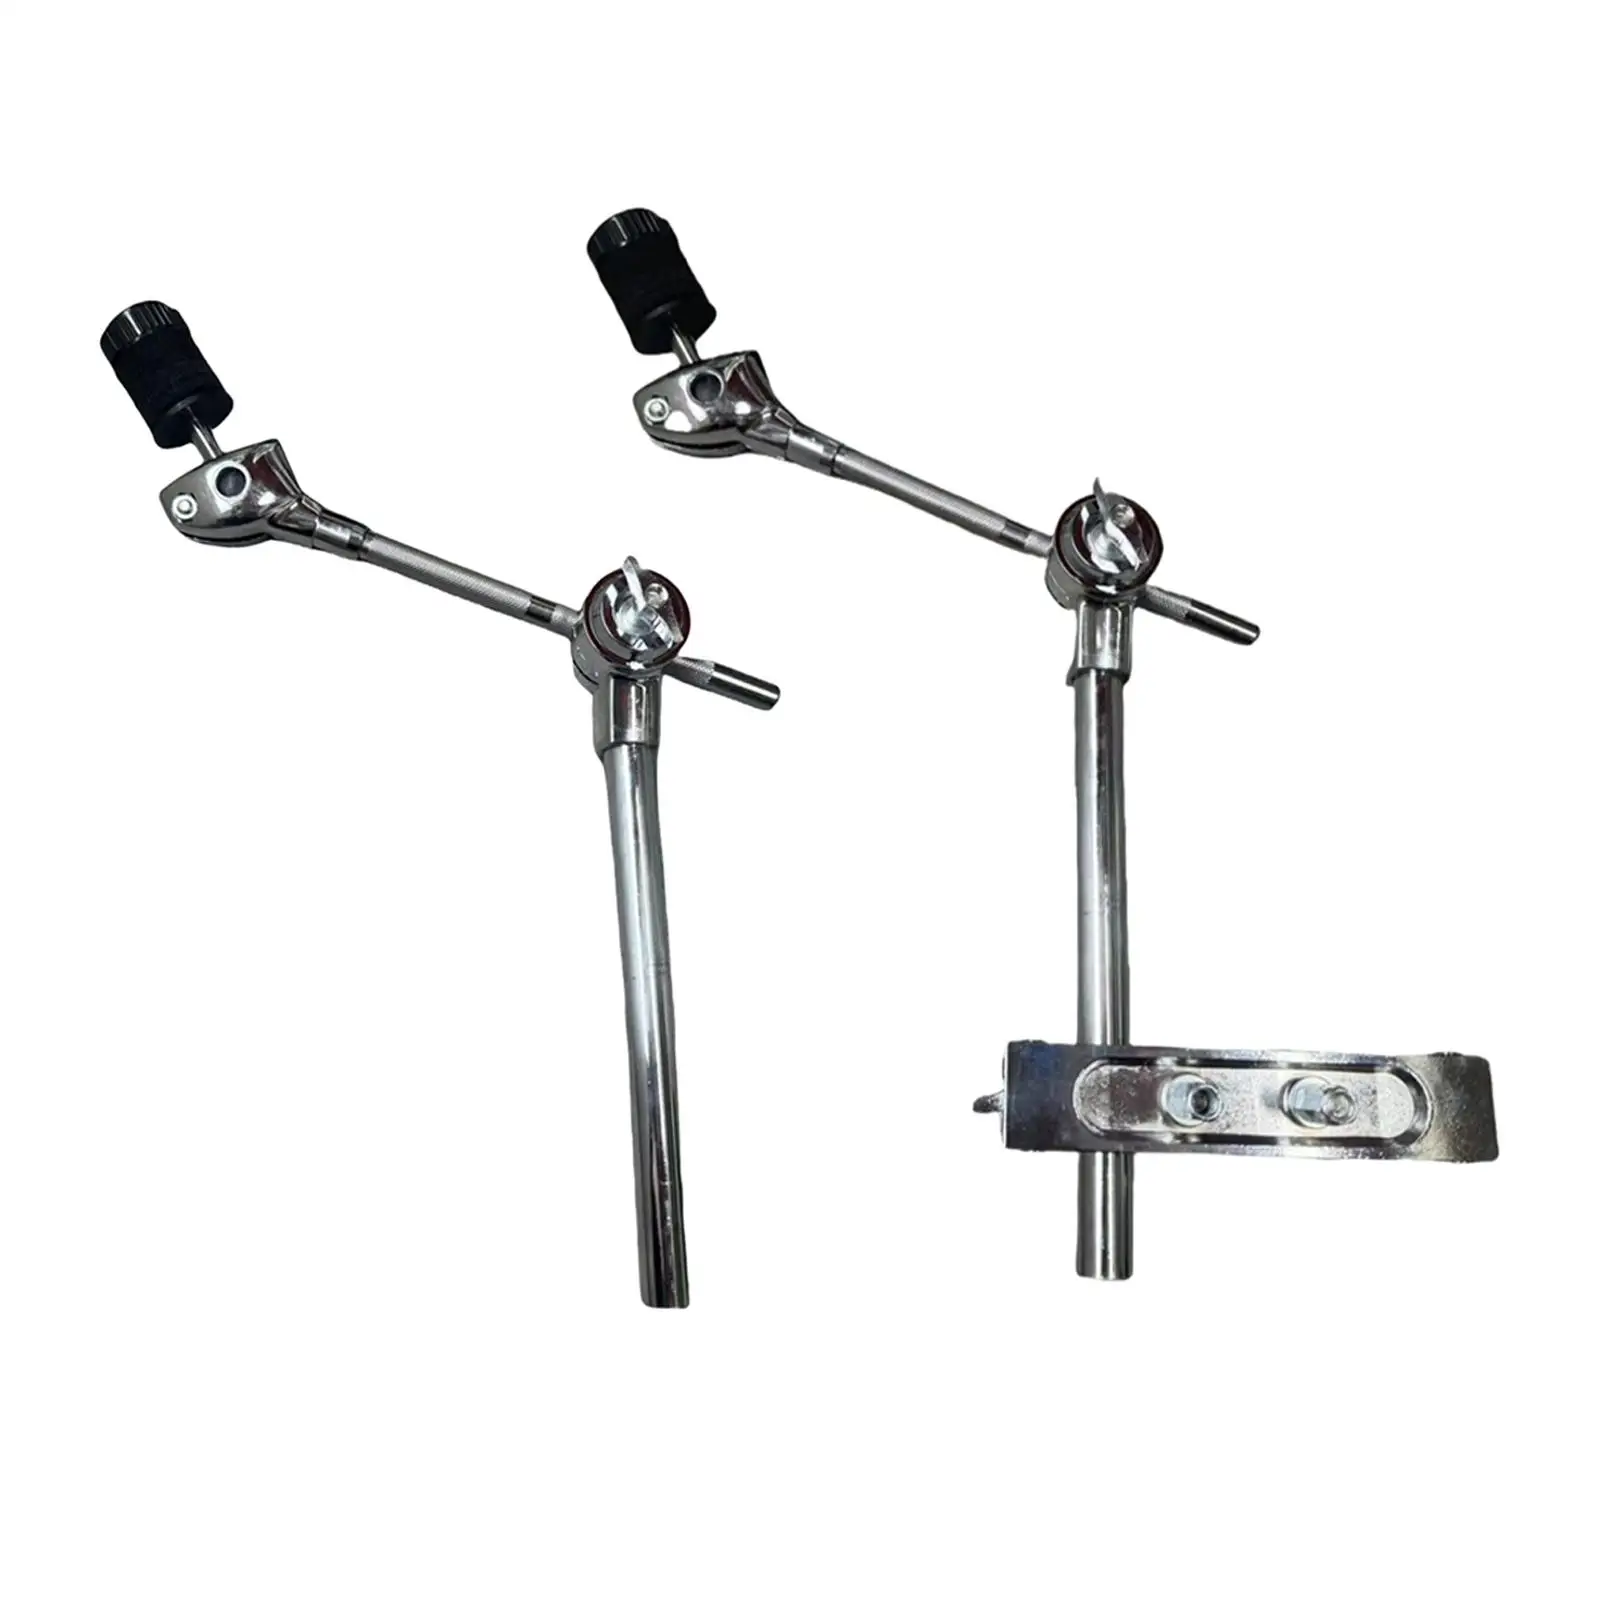 

Cymbal Holder Sturdy Hardware Cymbal Stand Cymbal Boom Arm for Splash Drum Parts Crash and Effects Cymbals Percussion Accs